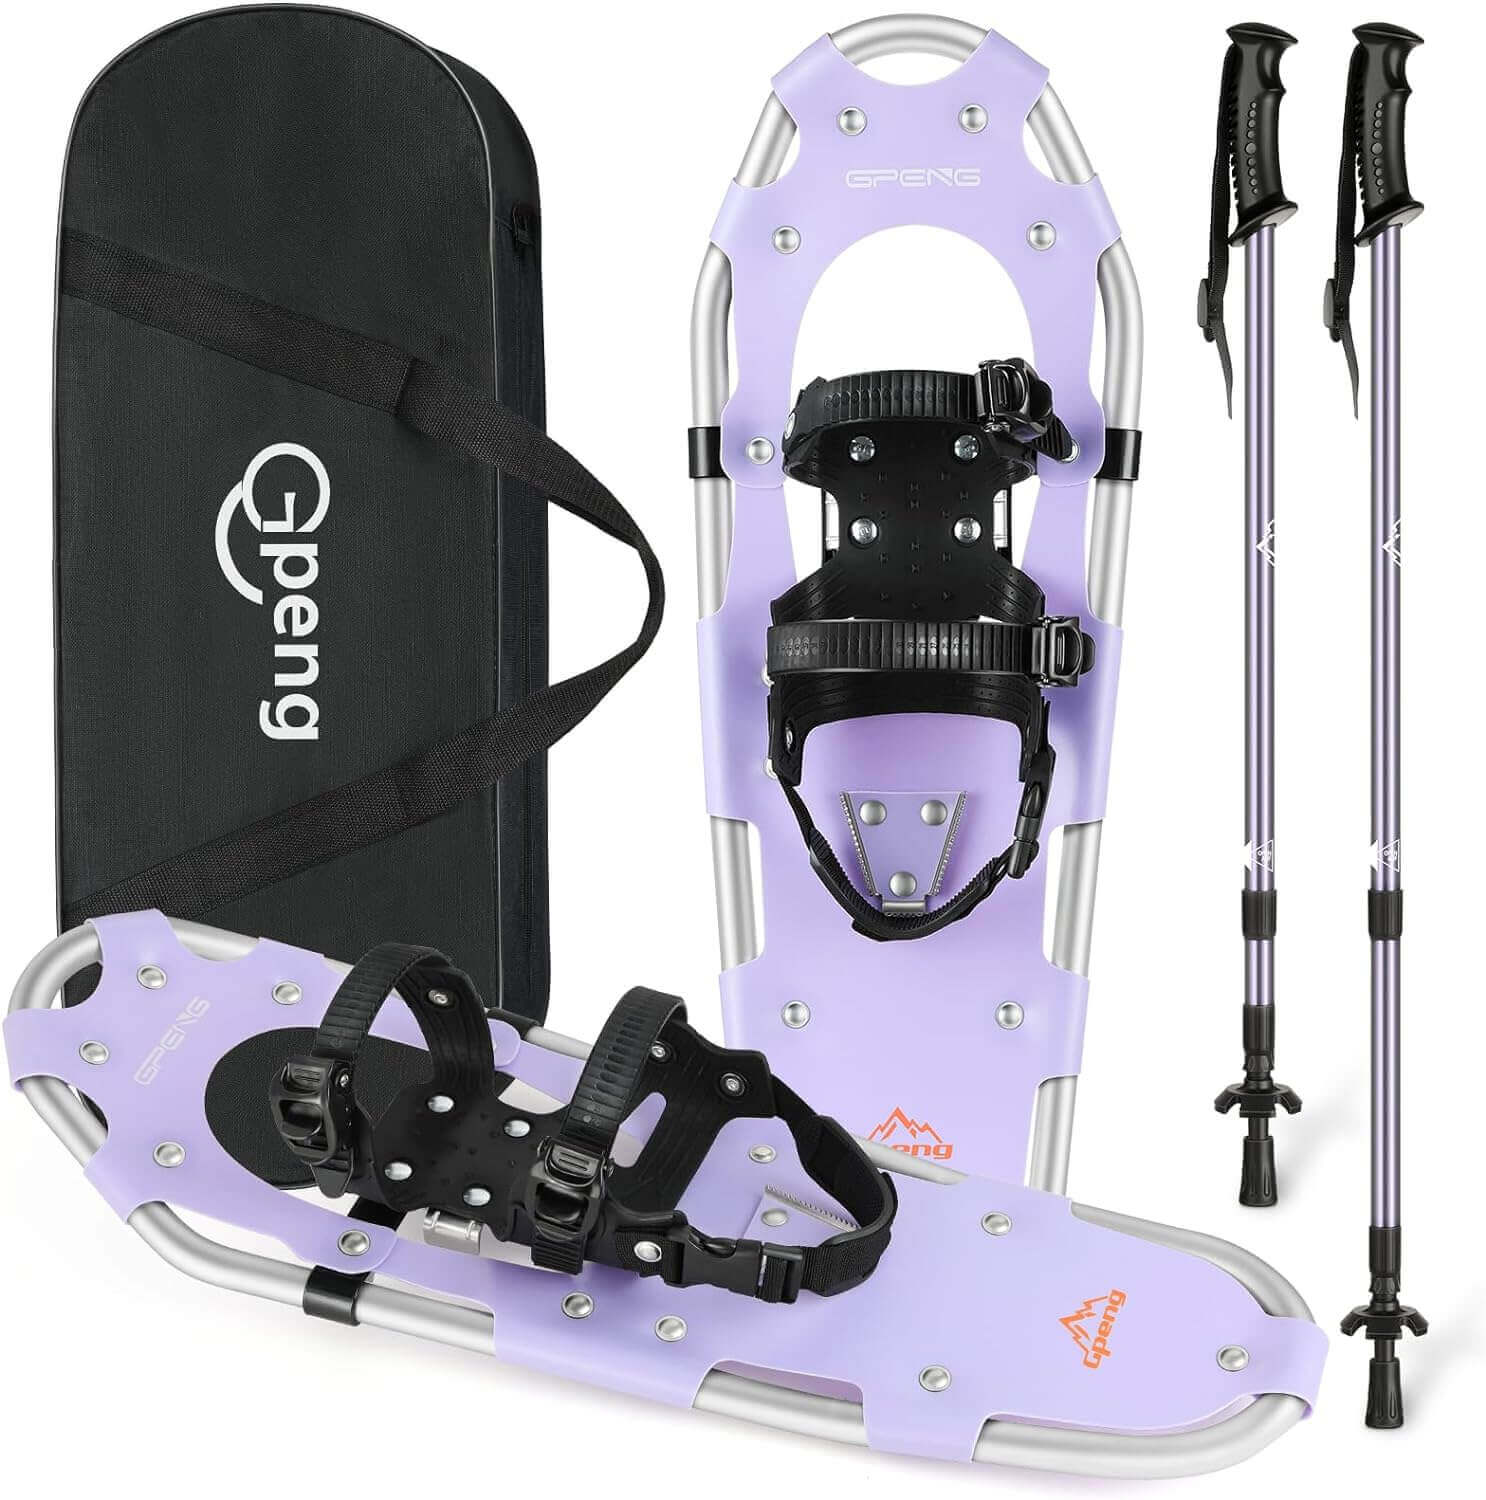 Shop The Latest >3-in-1 Xtreme Lightweight Terrain Snowshoes with Trekking Poles > *Only $121.45*> From The Top Brand > *‎Gpengl* > Shop Now and Get Free Shipping On Orders Over $45.00 >*Shop Earth Foot*